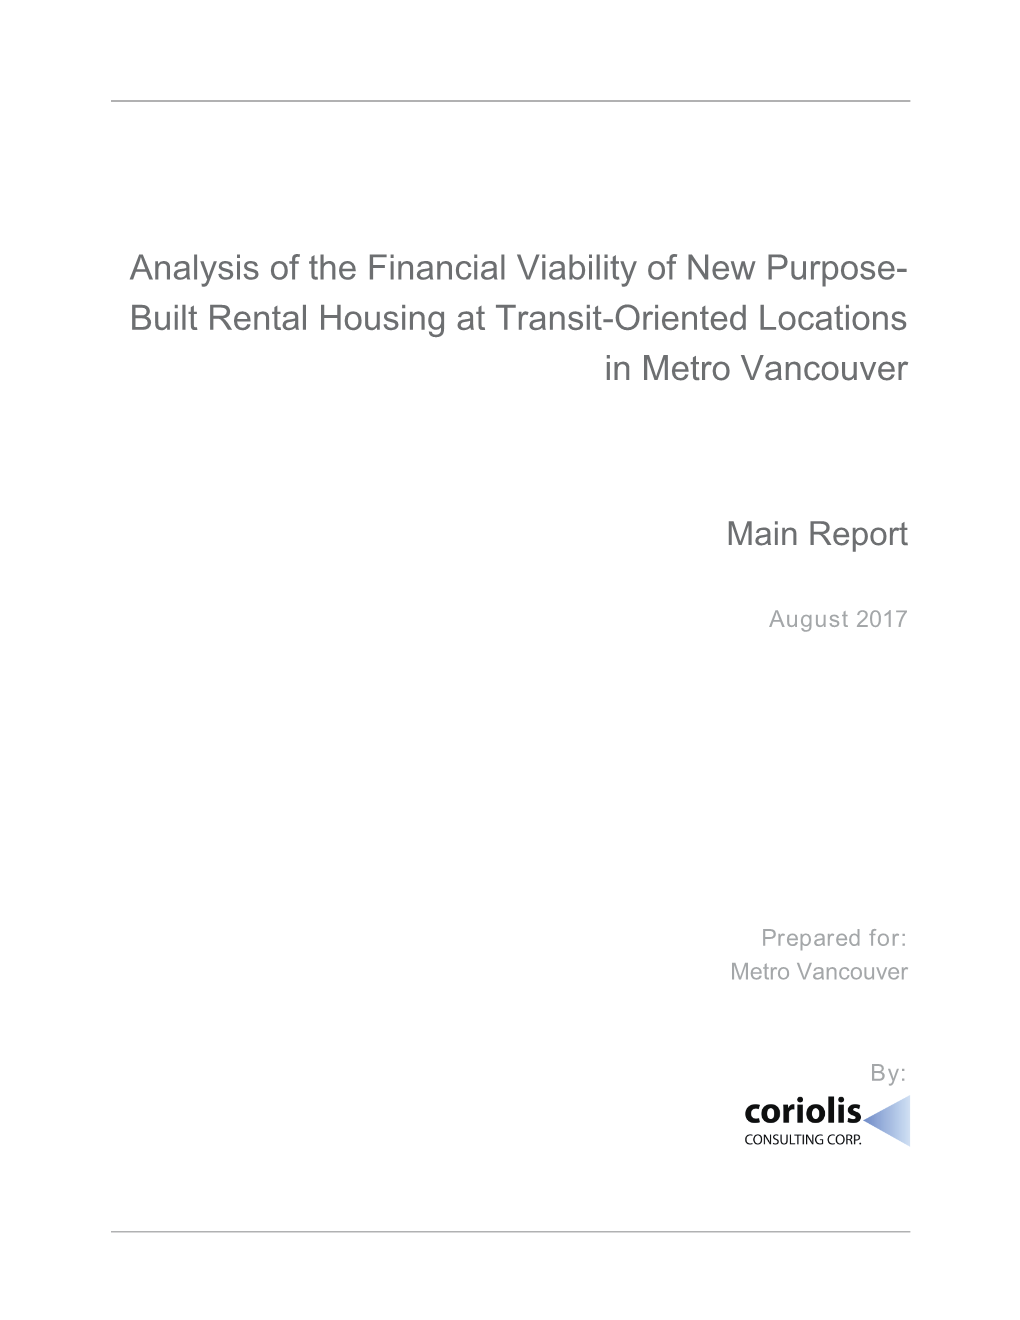 Analysis of the Financial Viability of New Purpose- Built Rental Housing at Transit-Oriented Locations in Metro Vancouver